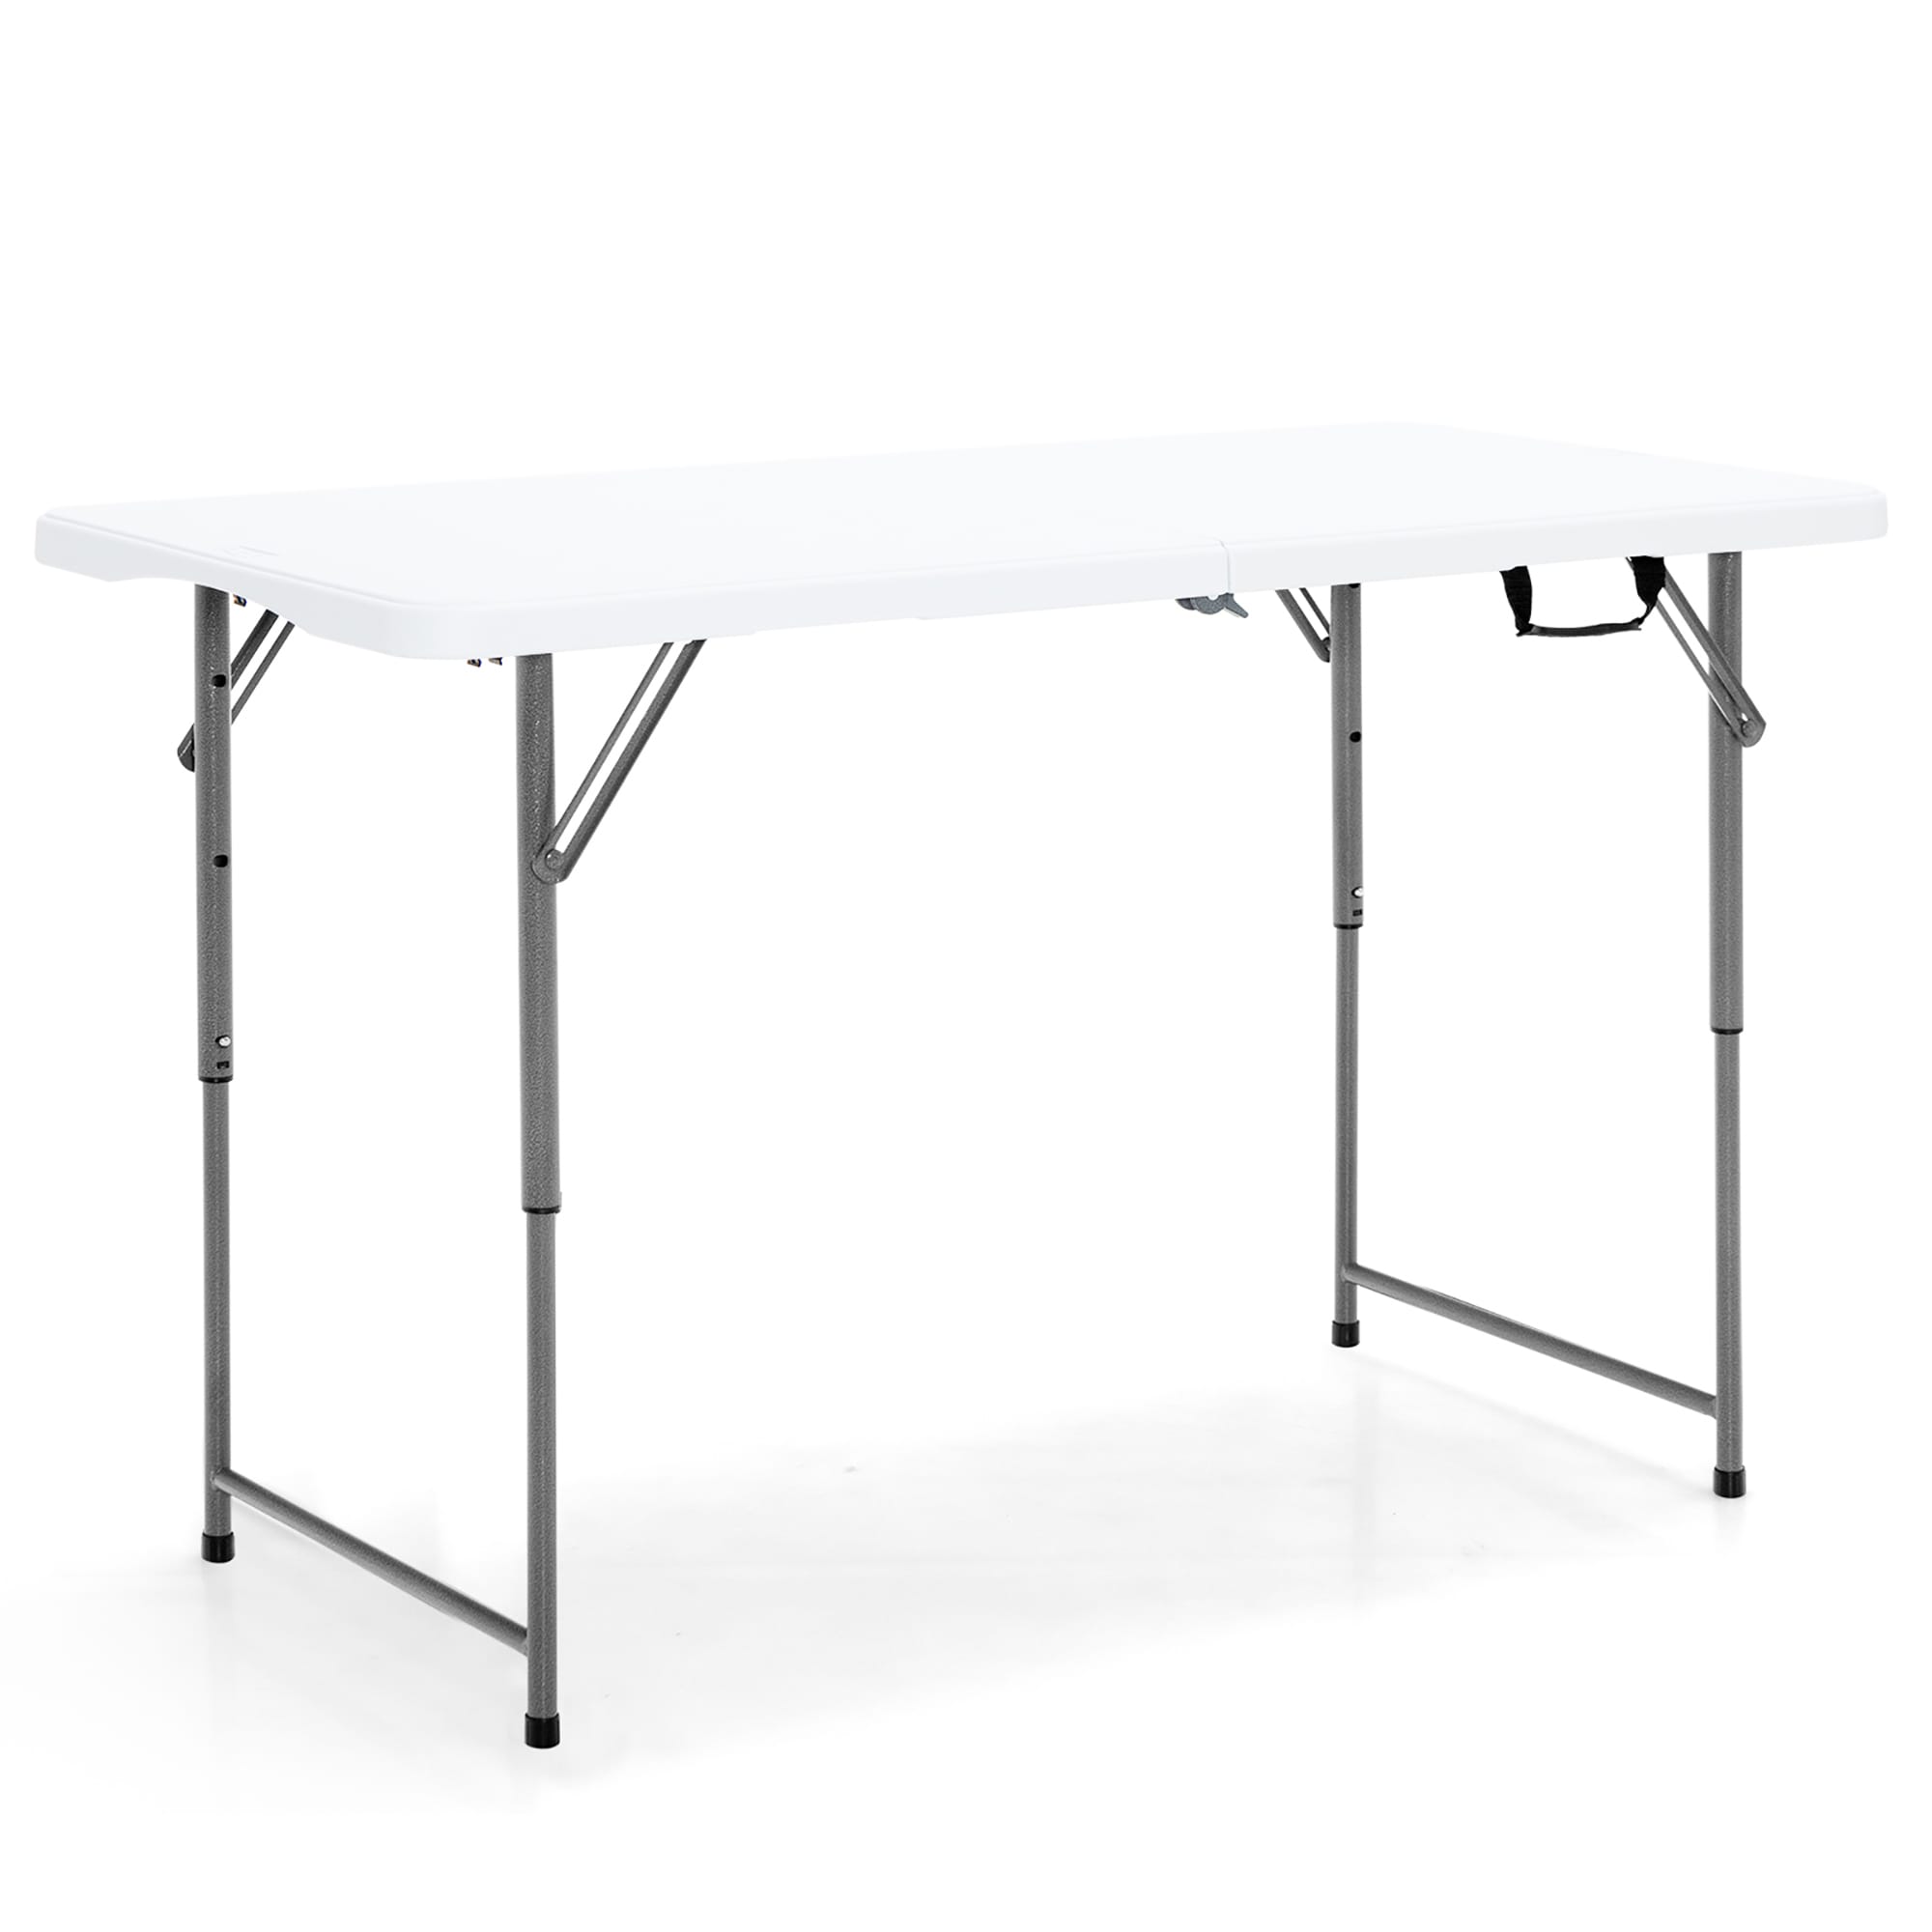  COSTWAY Folding Picnic Table, Portable 4ft Roll Up